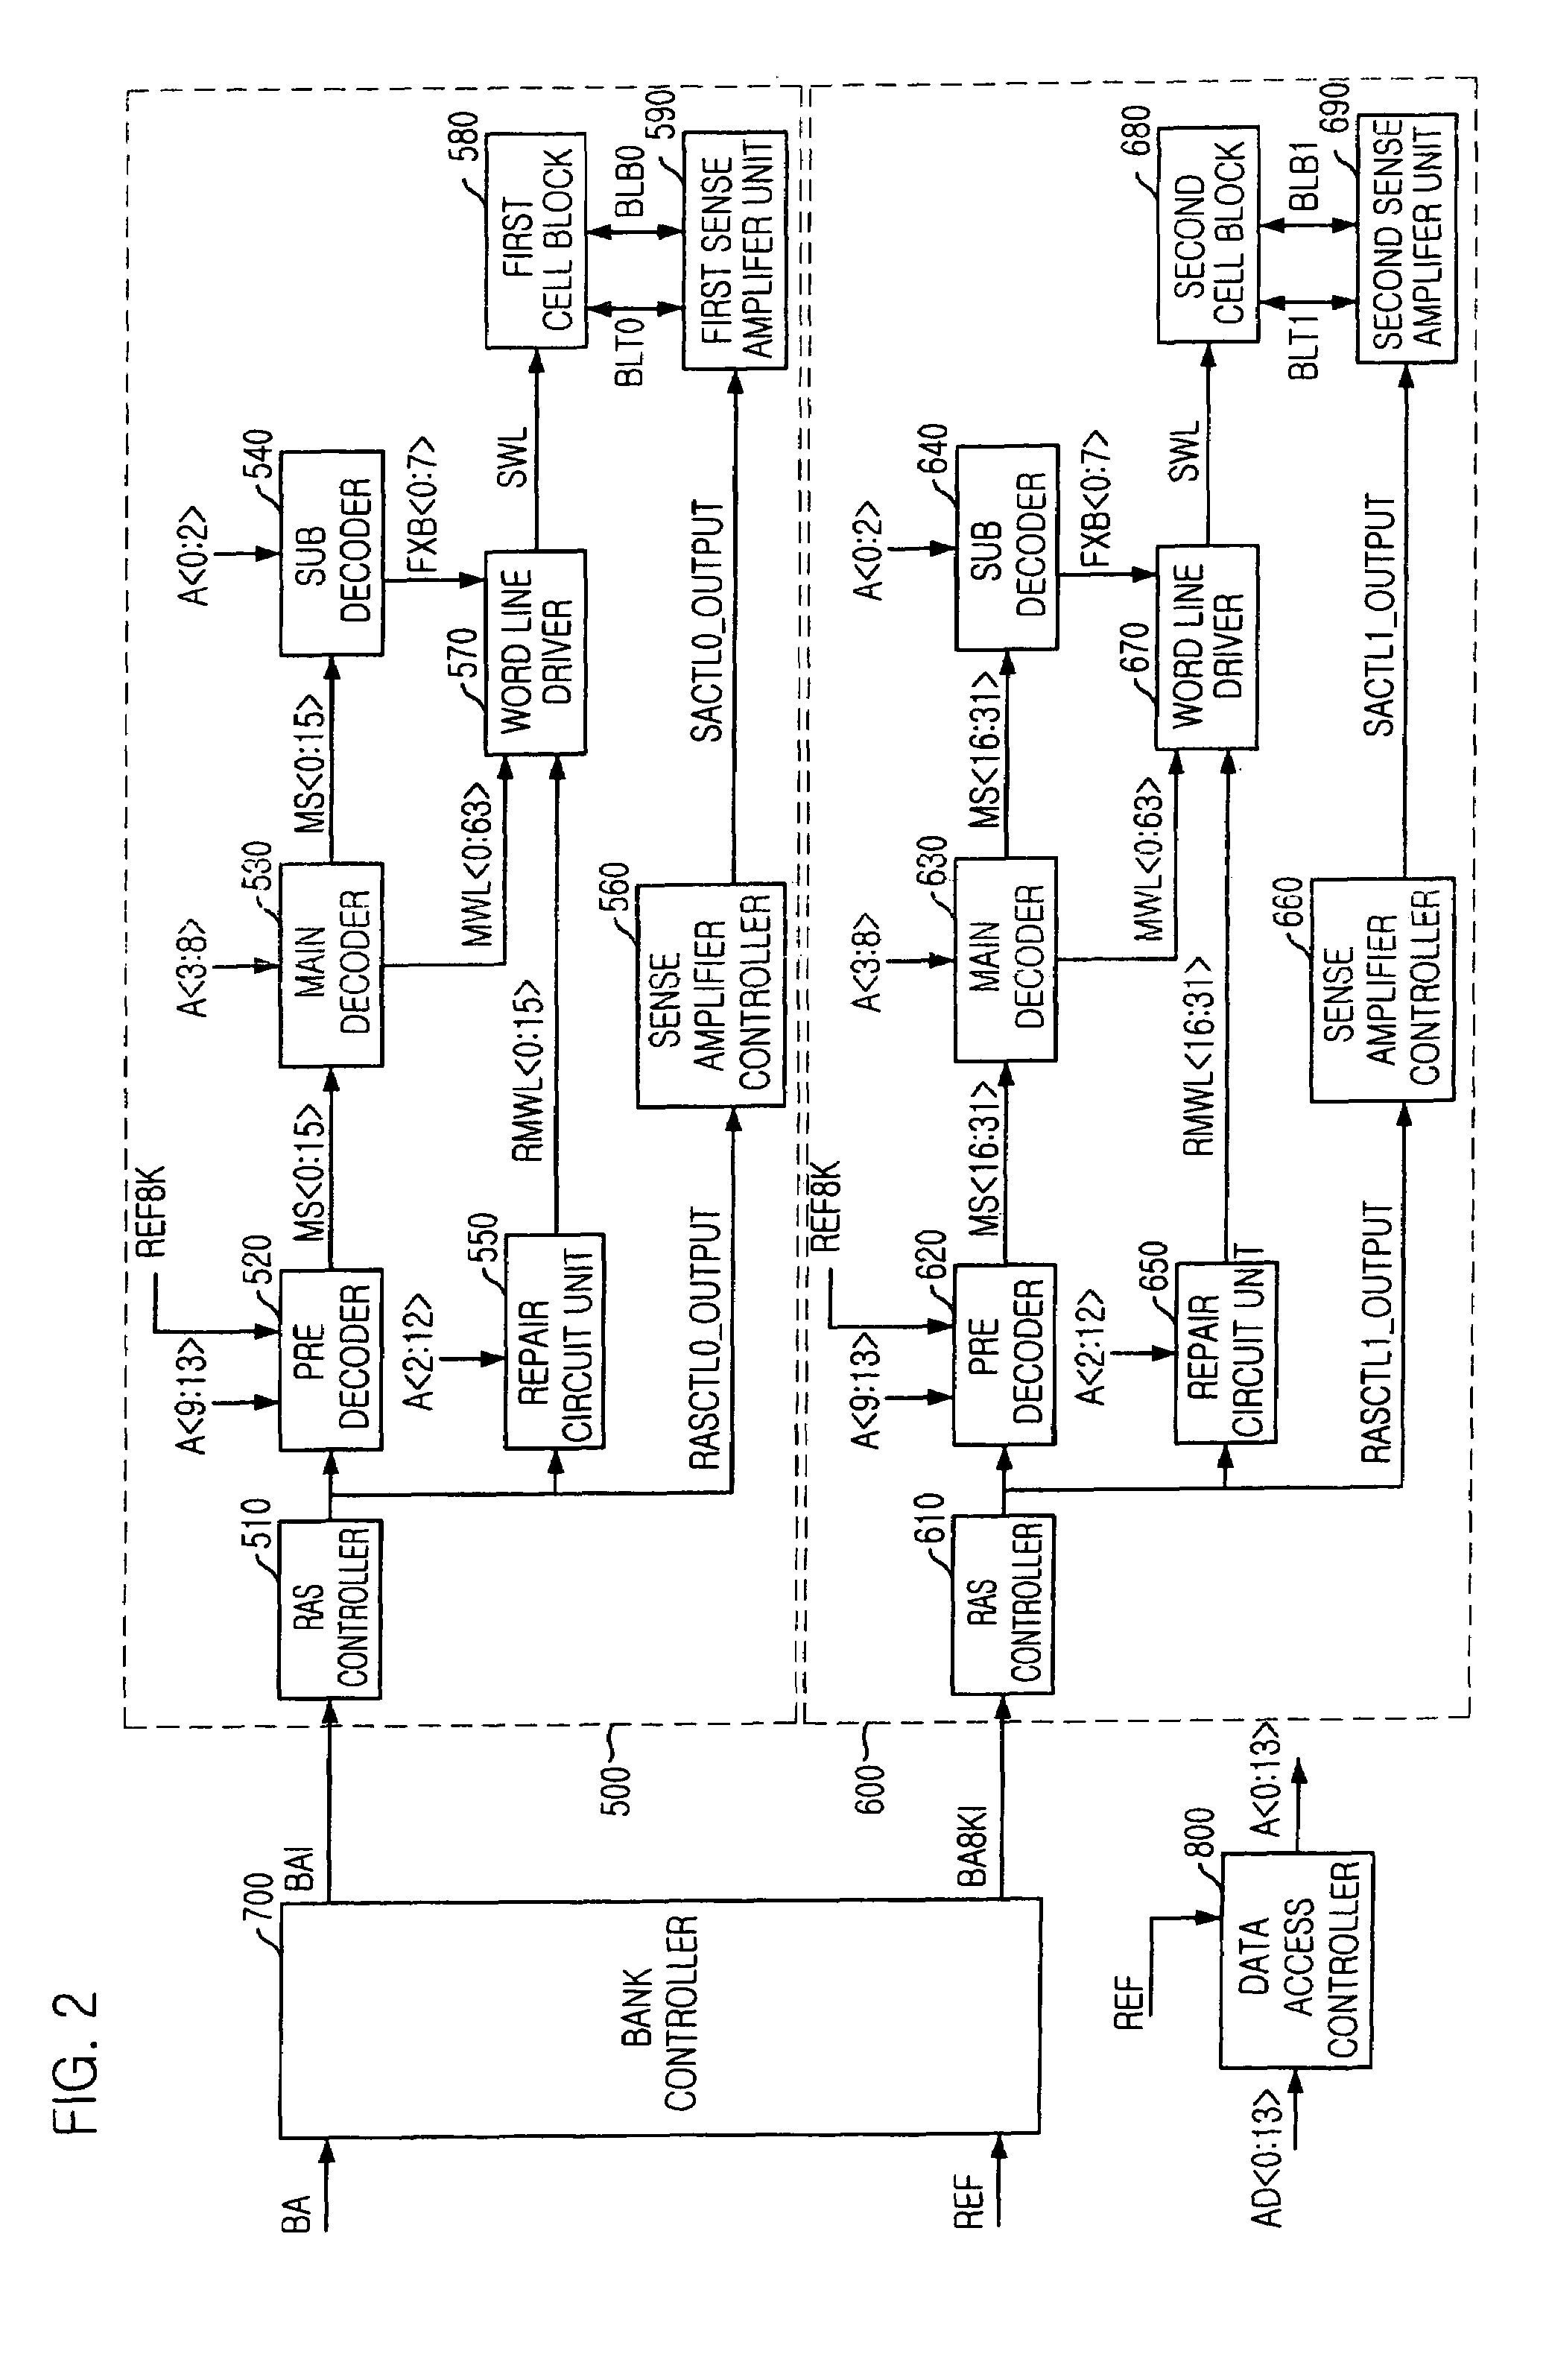 Semiconductor memory device for reducing peak current during refresh operation